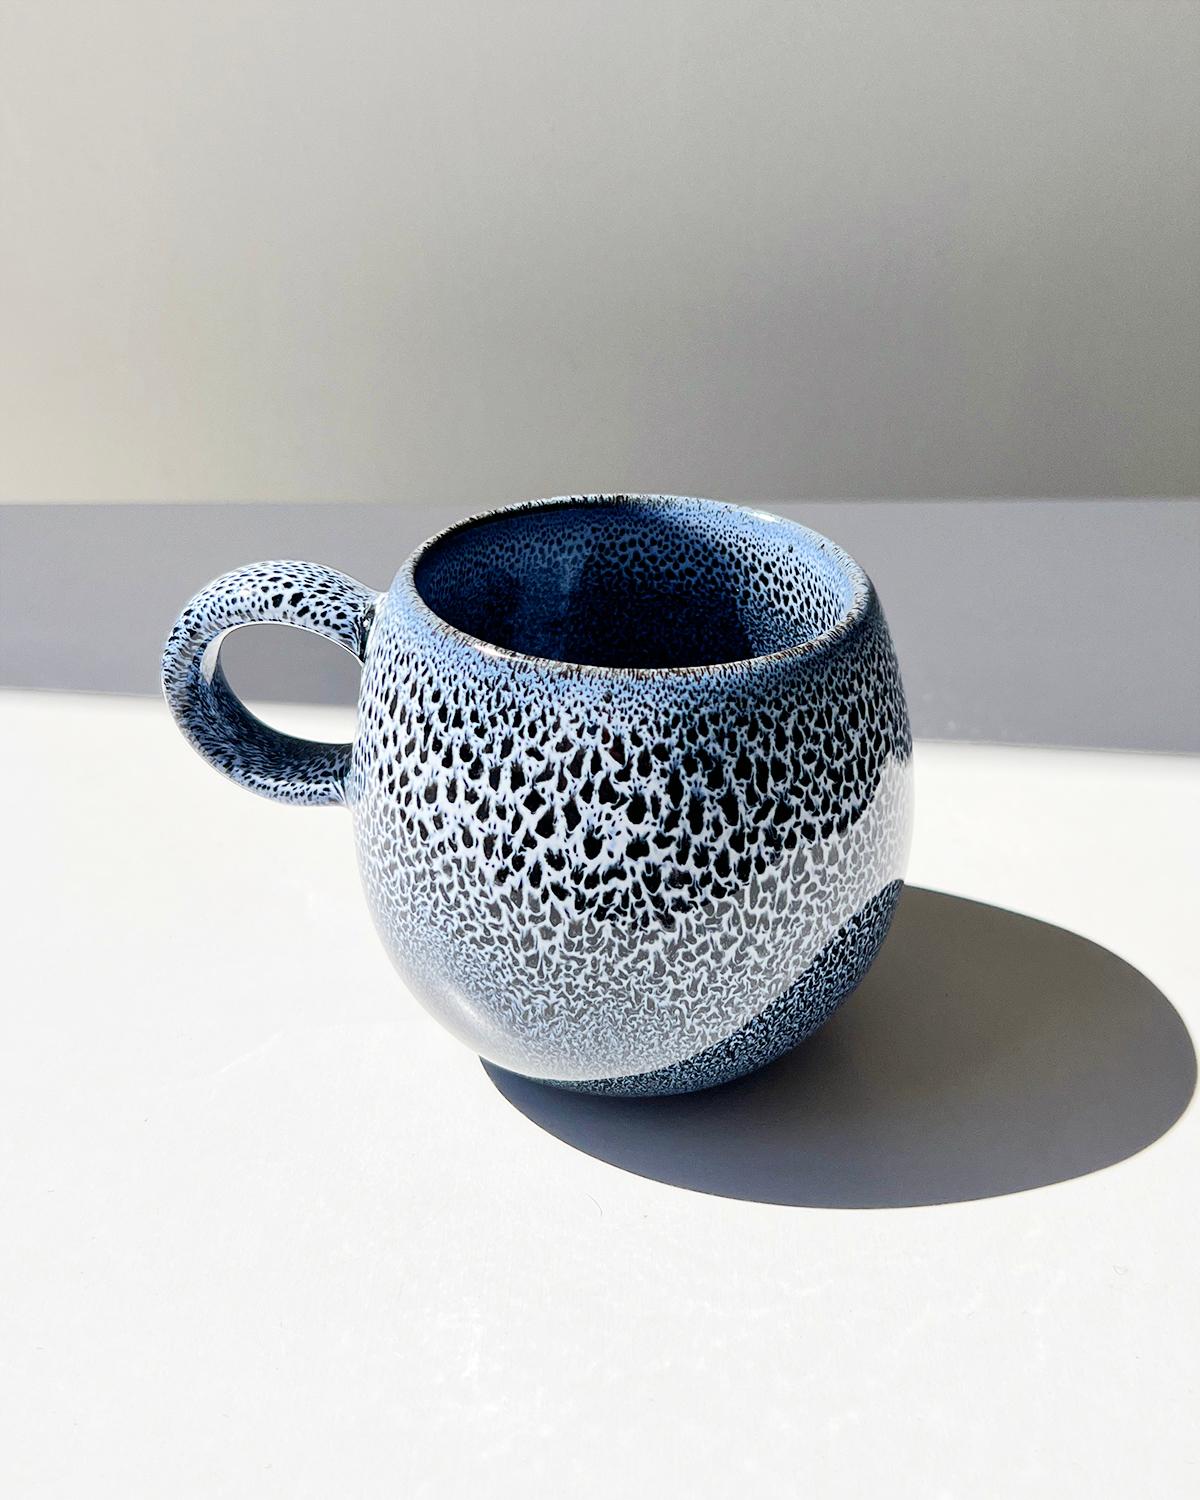 A set of handmade mugs for your coffee. For those that want an elegant and understated mug set, these stunning indigo blue white mugs are the perfect decor item to add to your collection. The organic ivory and blue speckled surface of these elegant